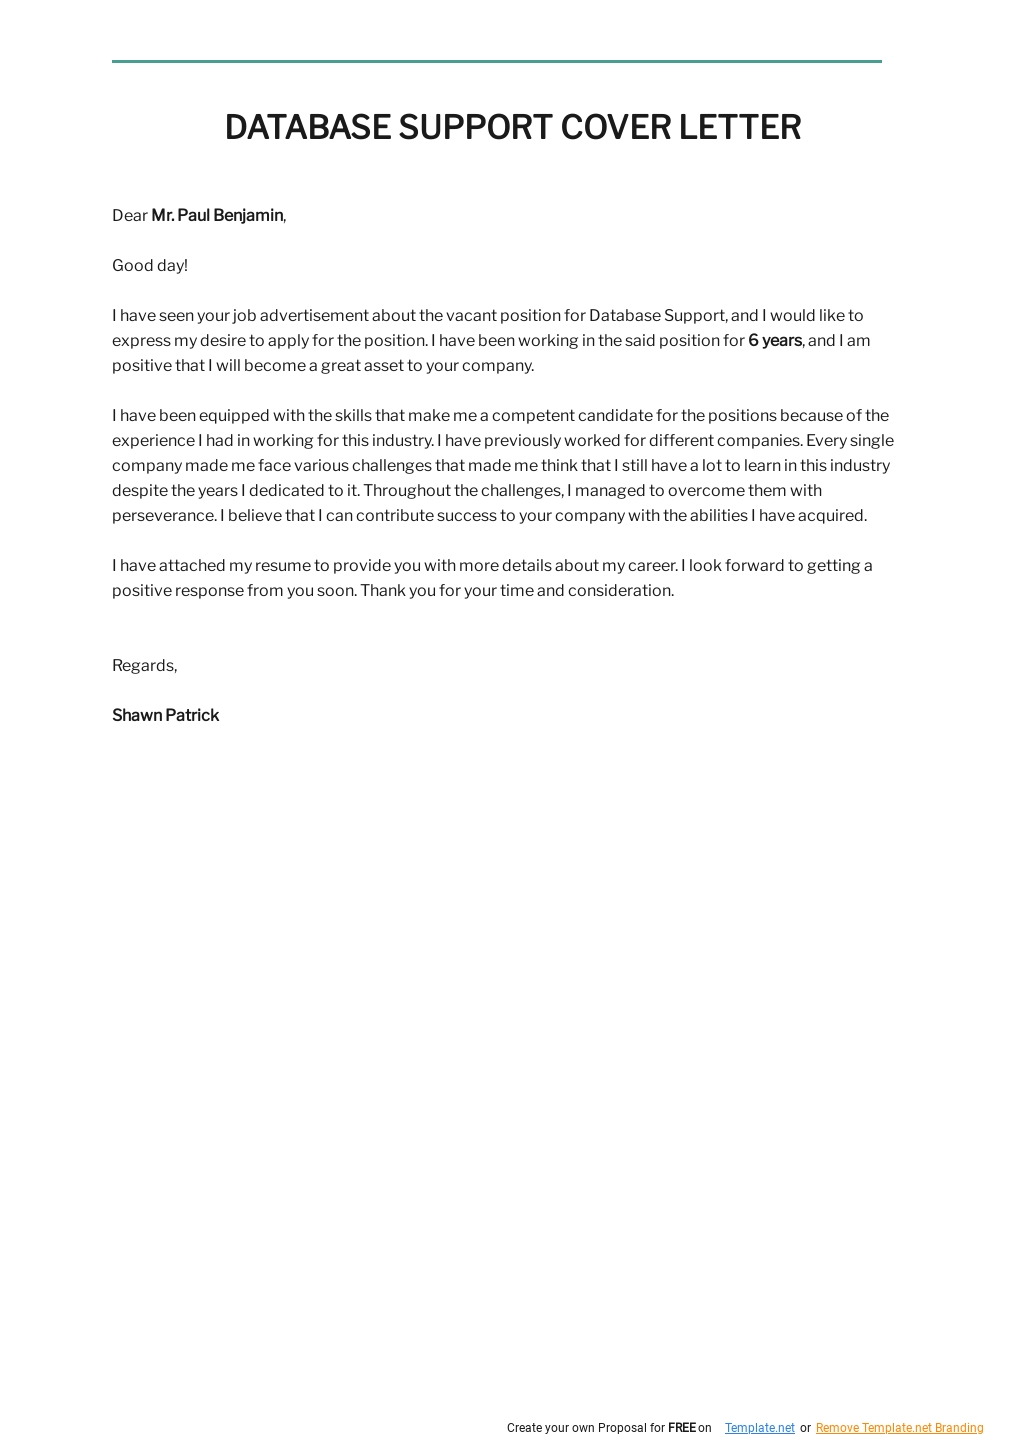 Database Support Cover Letter Template.jpe